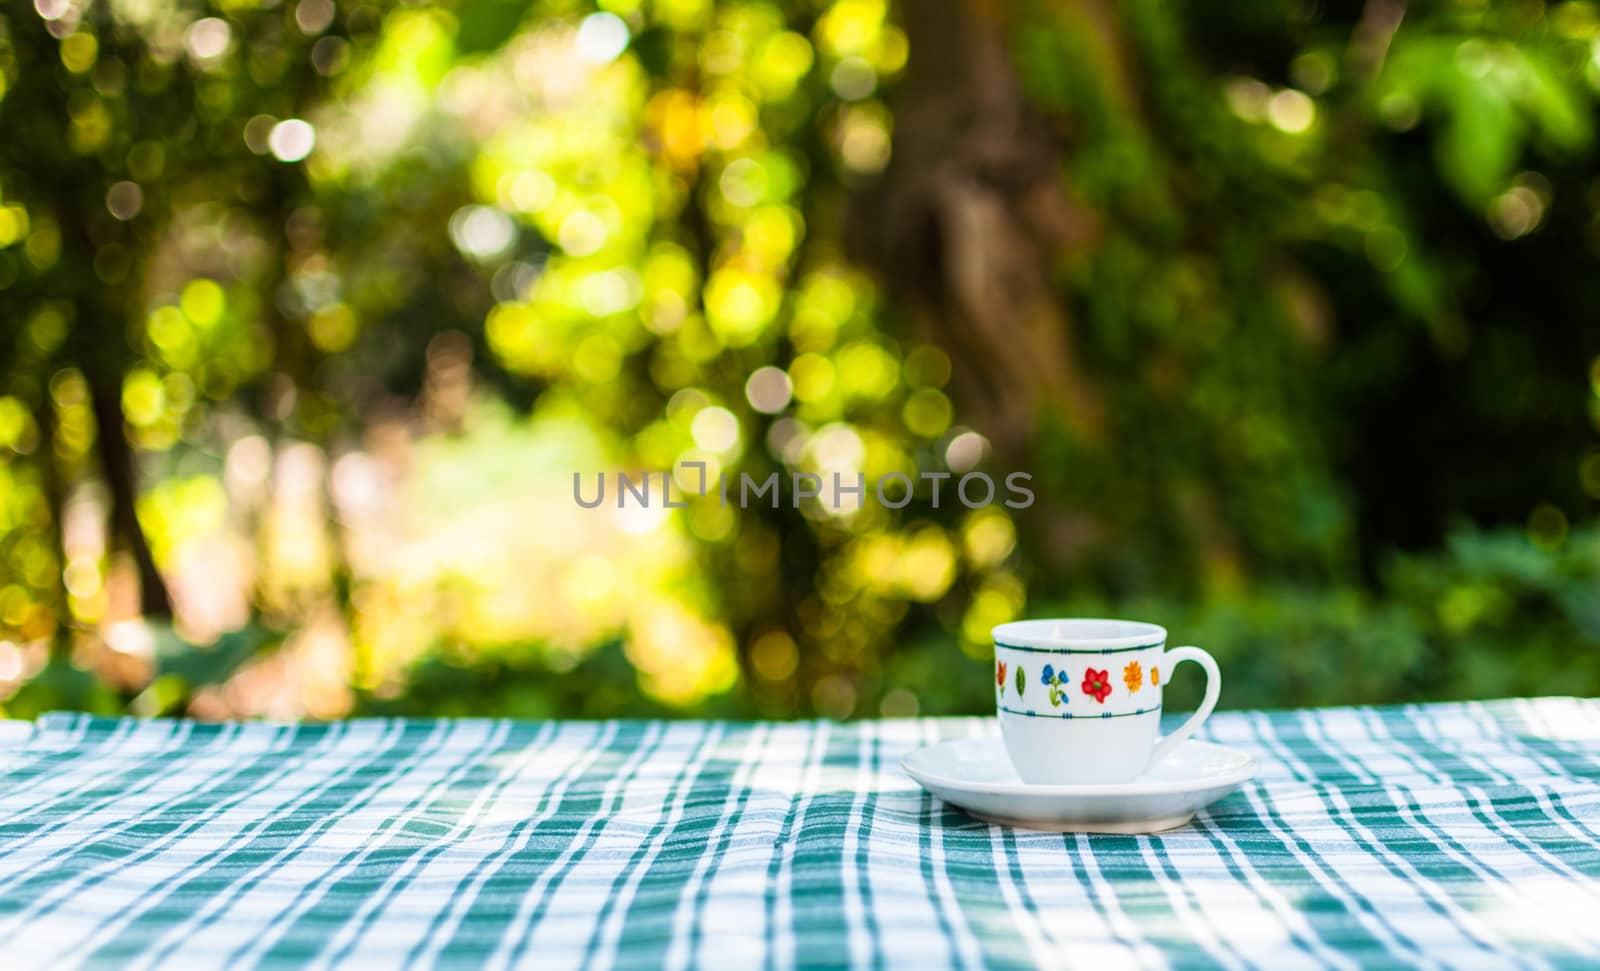 A little cup of coffe on a table in the garden